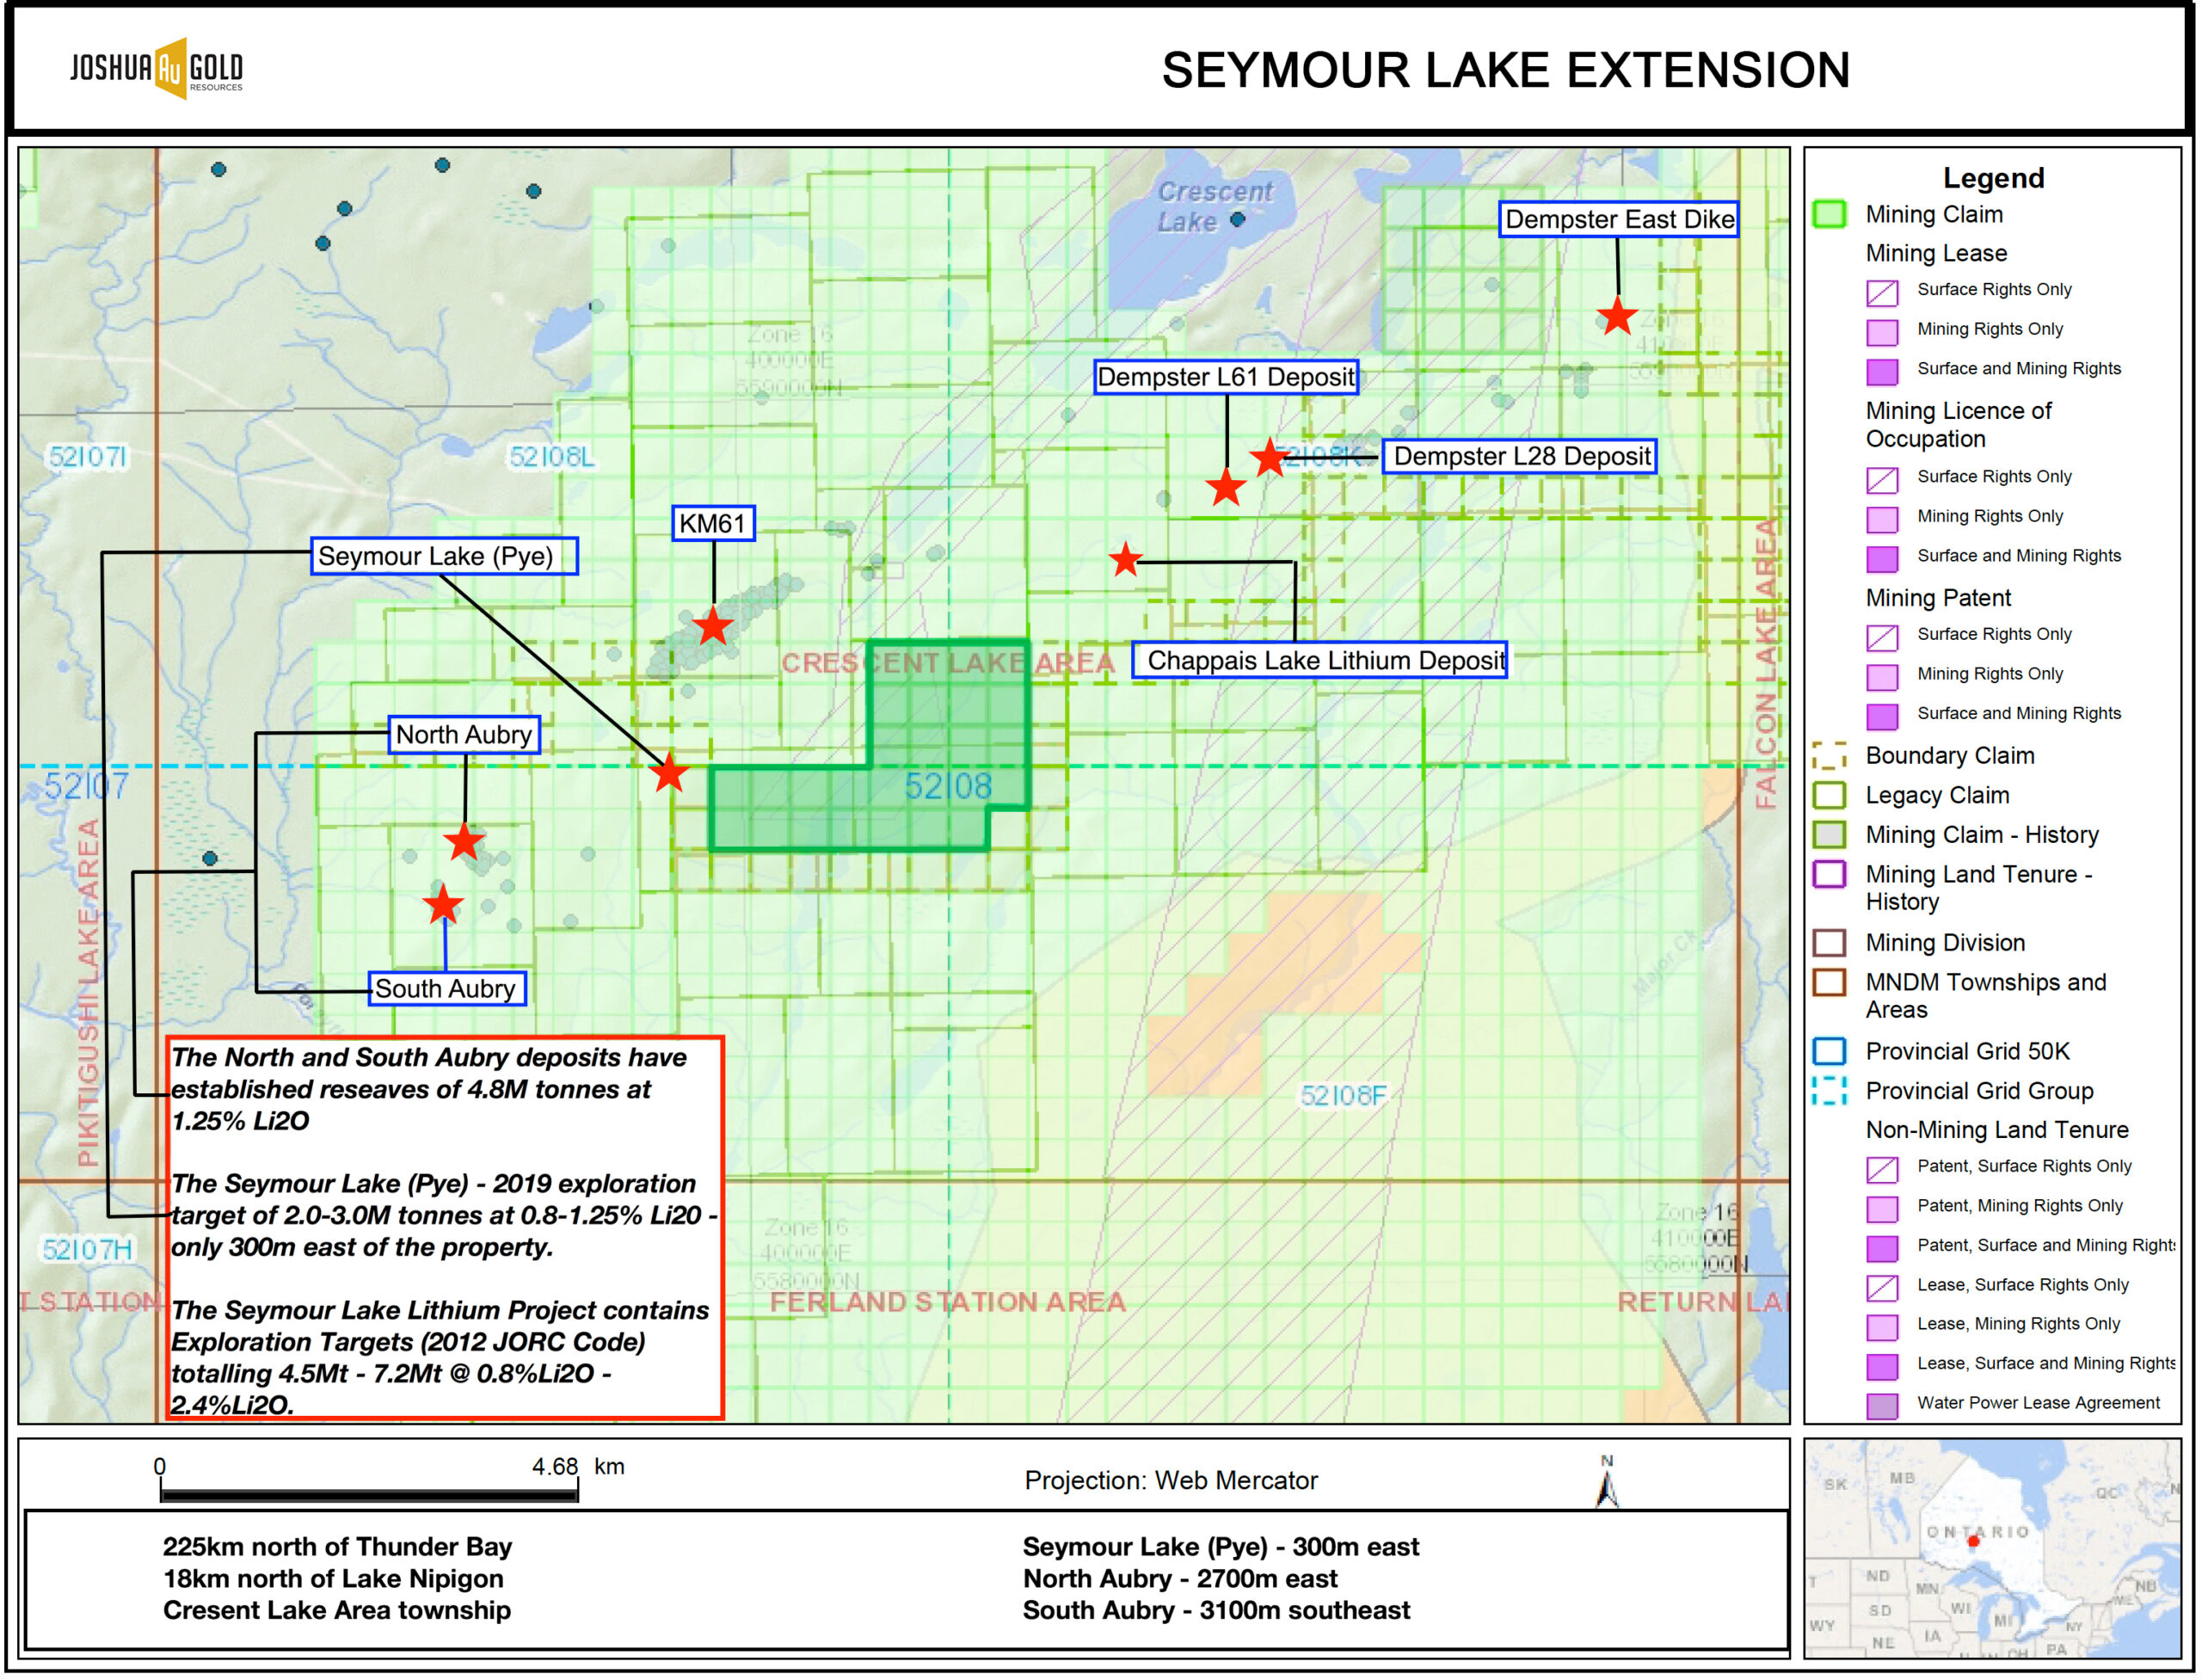 Joshua Gold Resources - Press Release - Findings from Joshua Gold Resources Lithium Prospect Property - Seymour Lake Extension Property Map